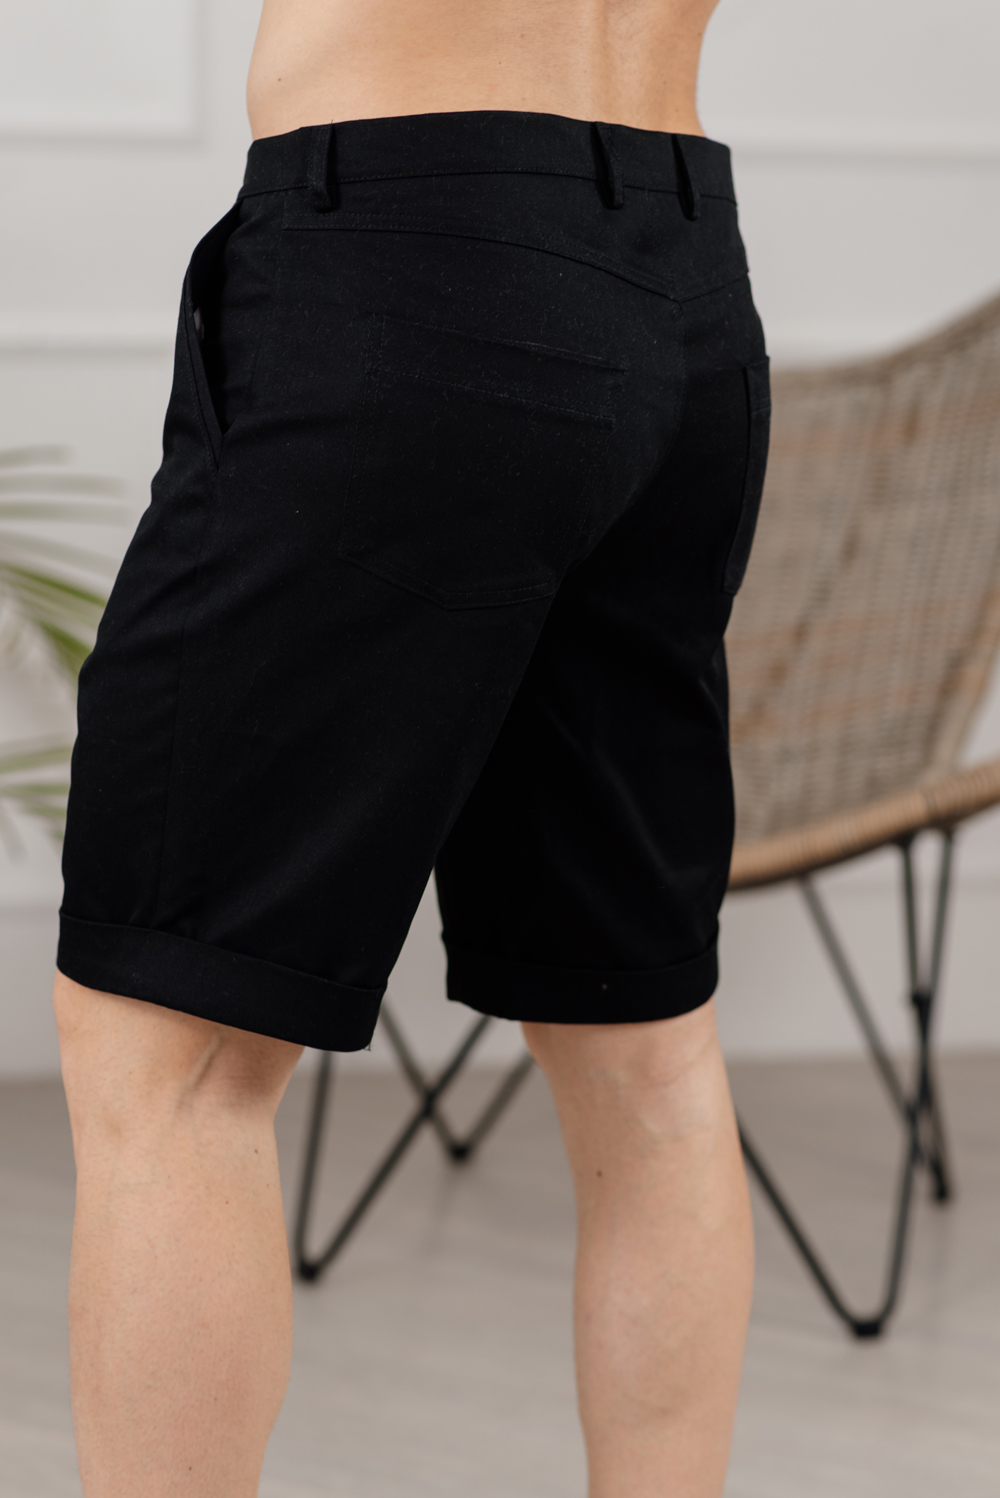 Black cotton shorts with pockets